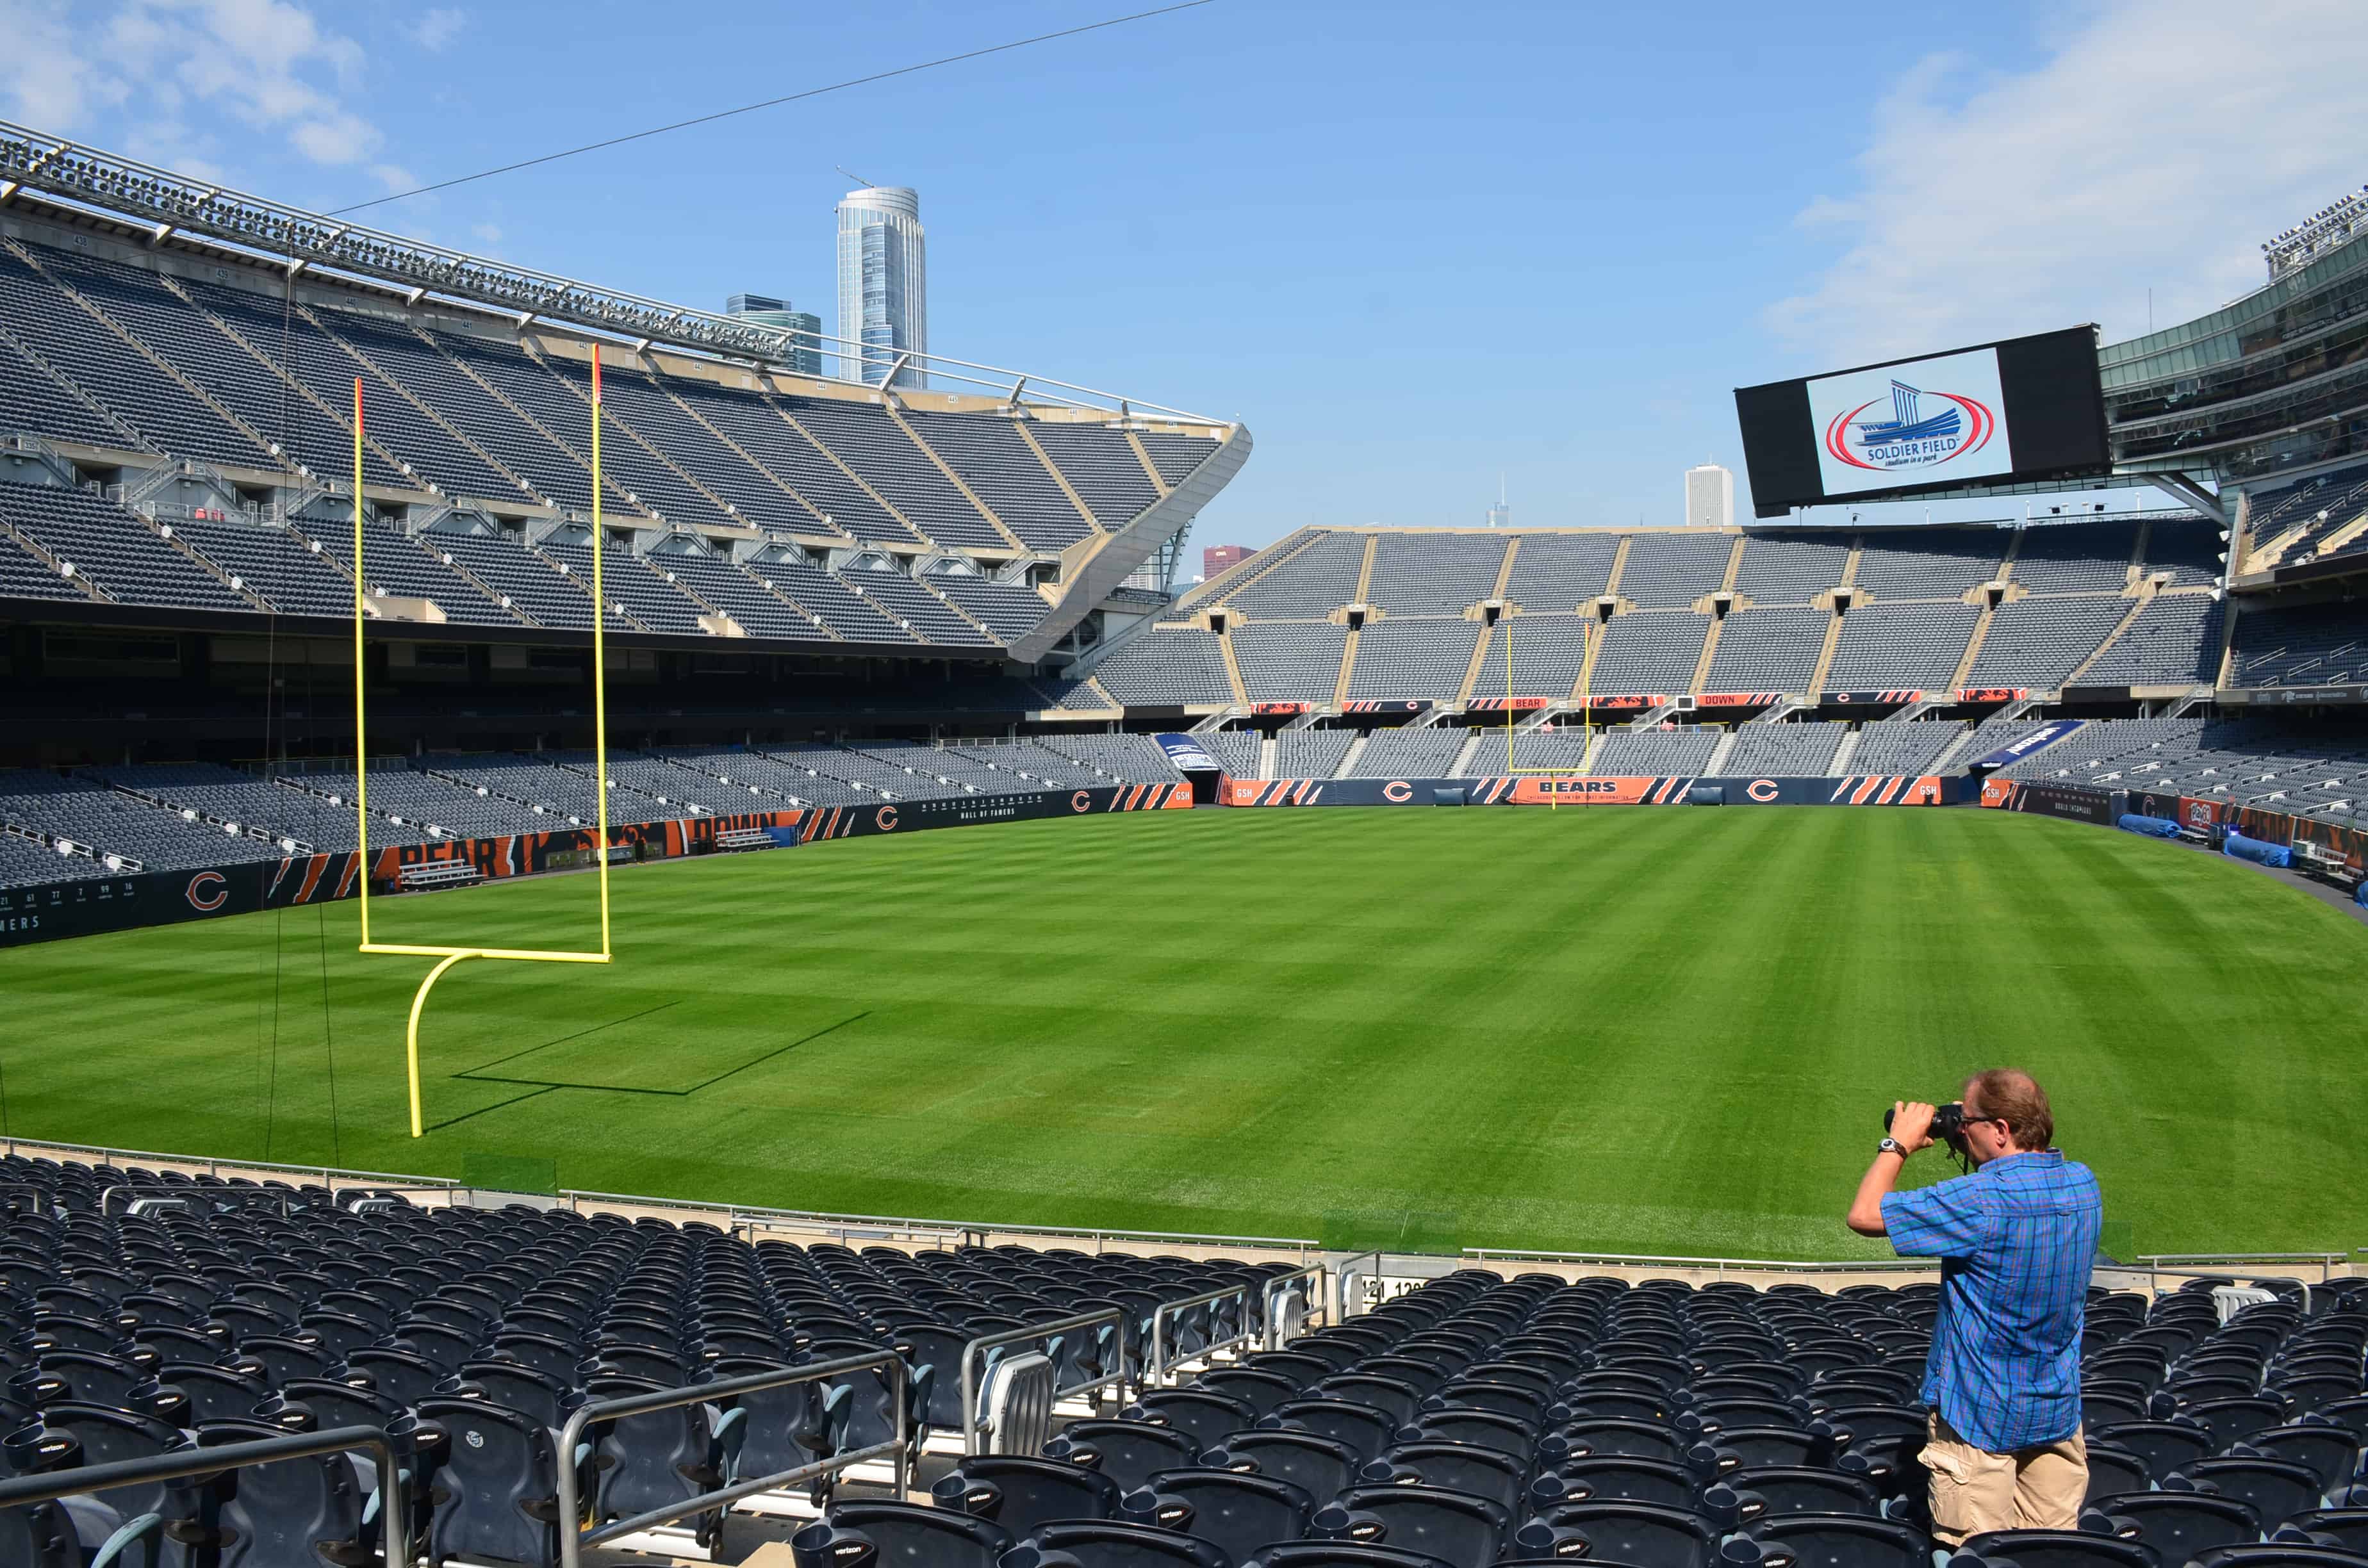 The field at Soldier Field in Chicago, Illinois